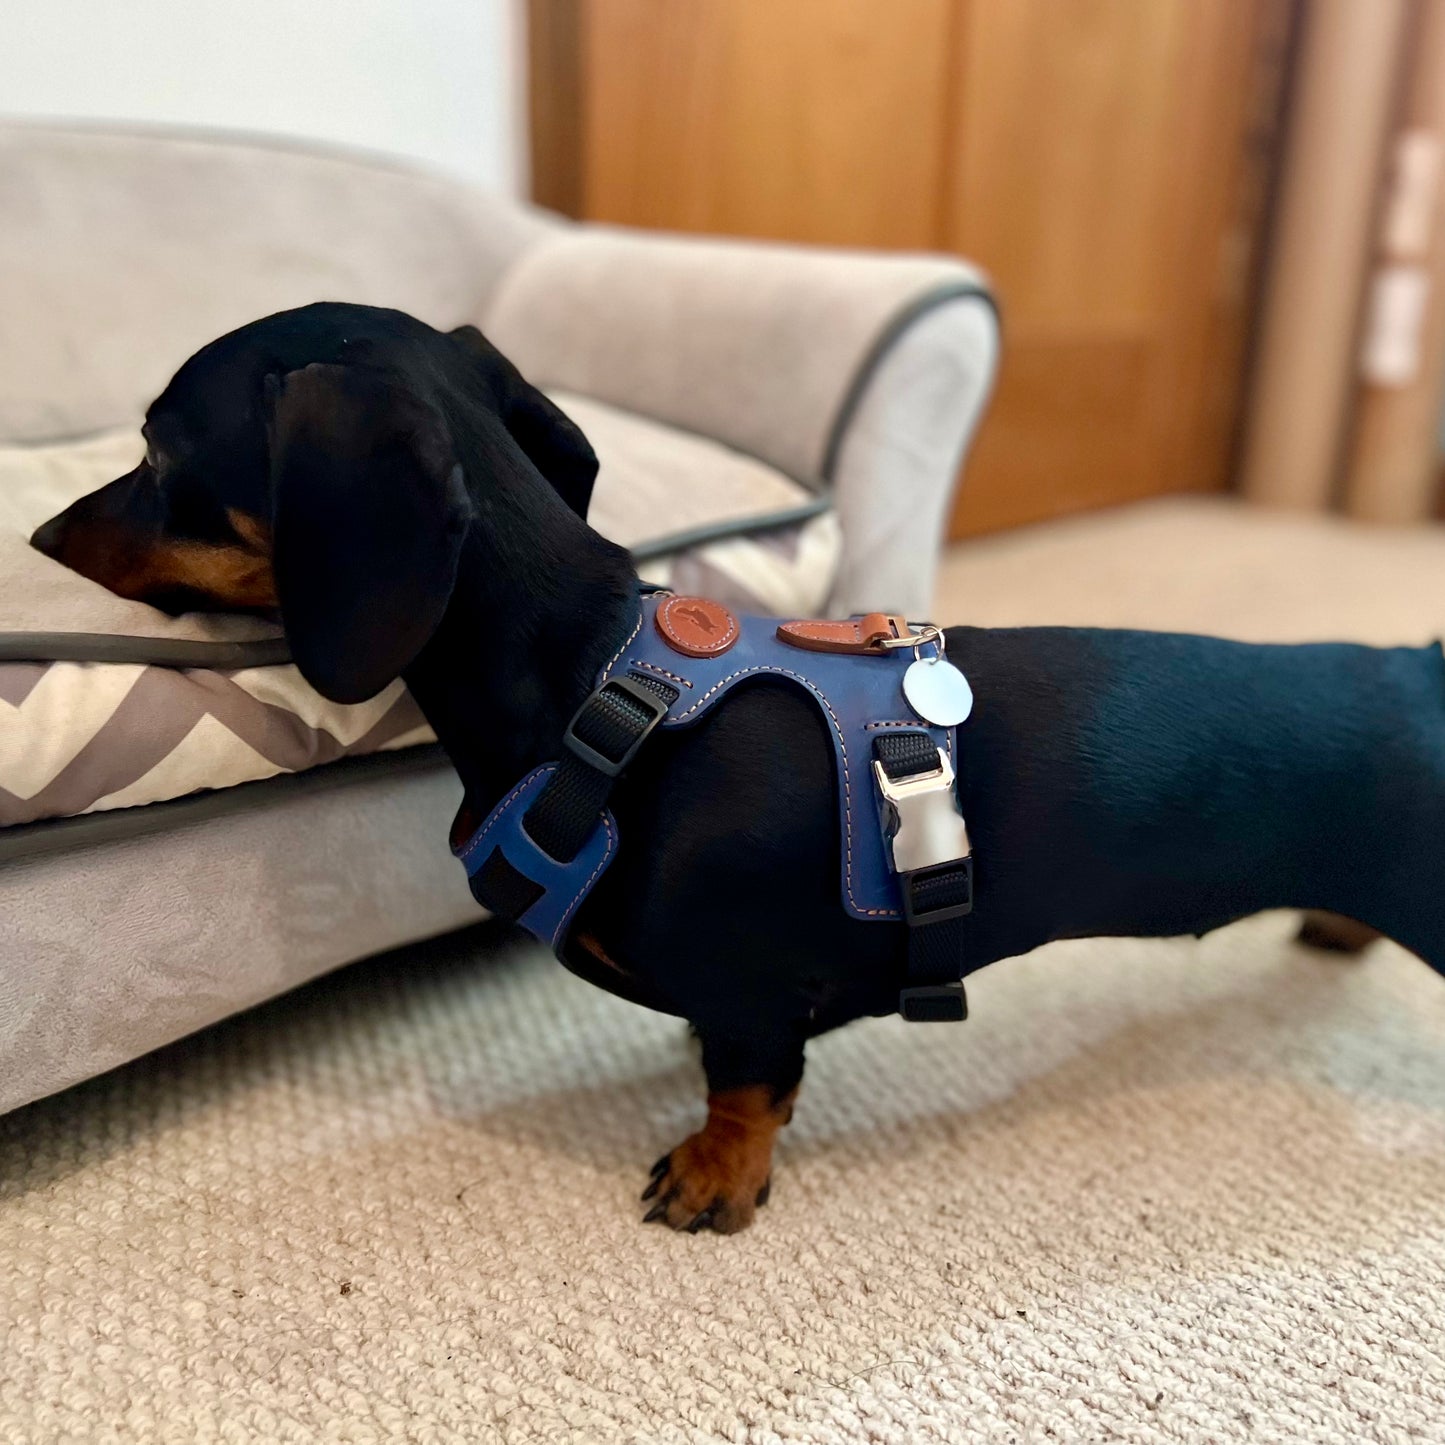 Blue Leather Dog Harness